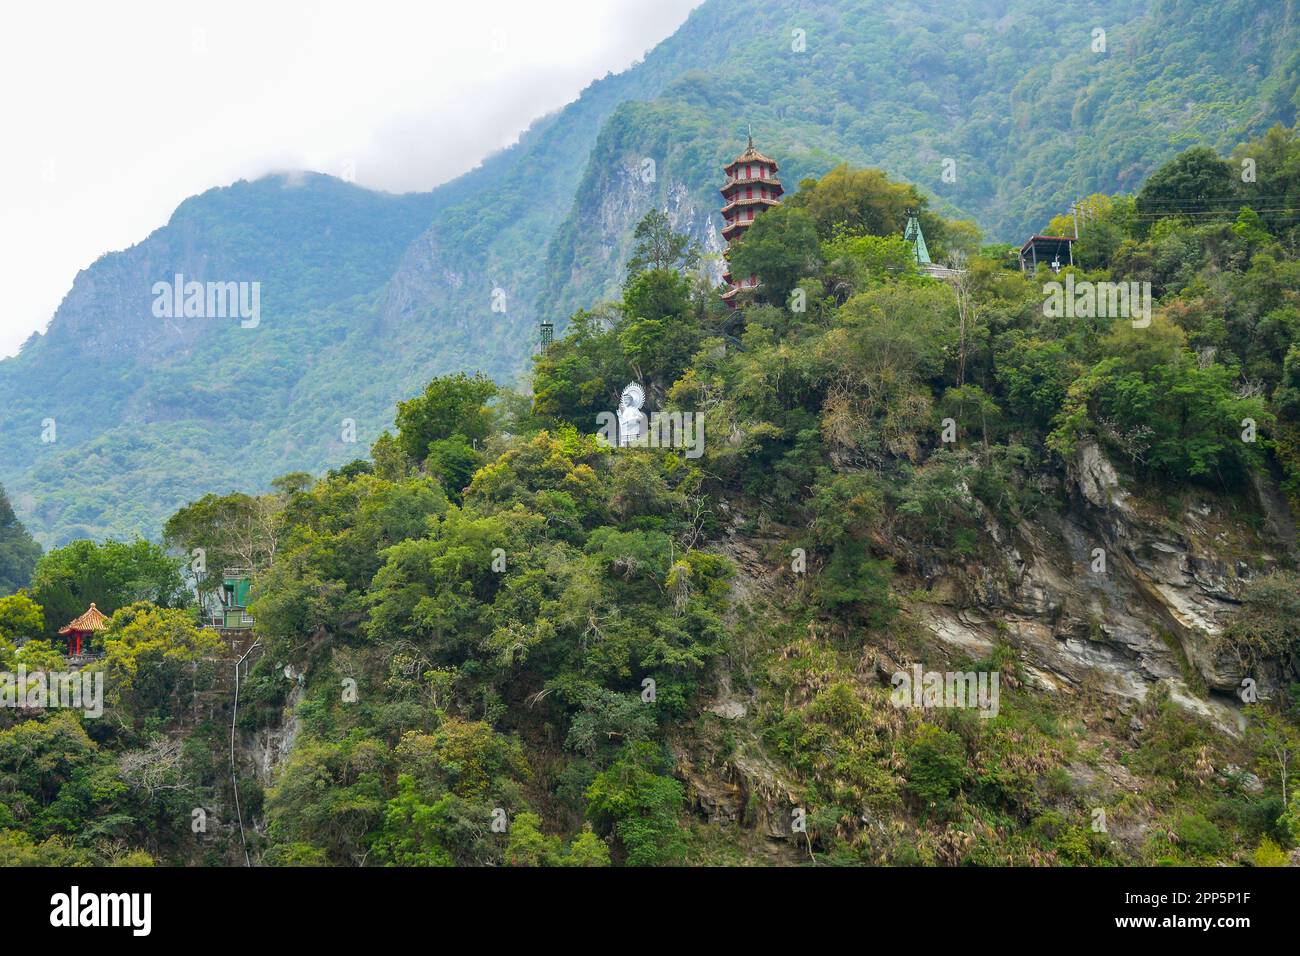 Chinese pagoda and Buddha statue at the top of mountain in Taroko National Park gorge in Hualien, Xiulin Township, Taiwan Stock Photo